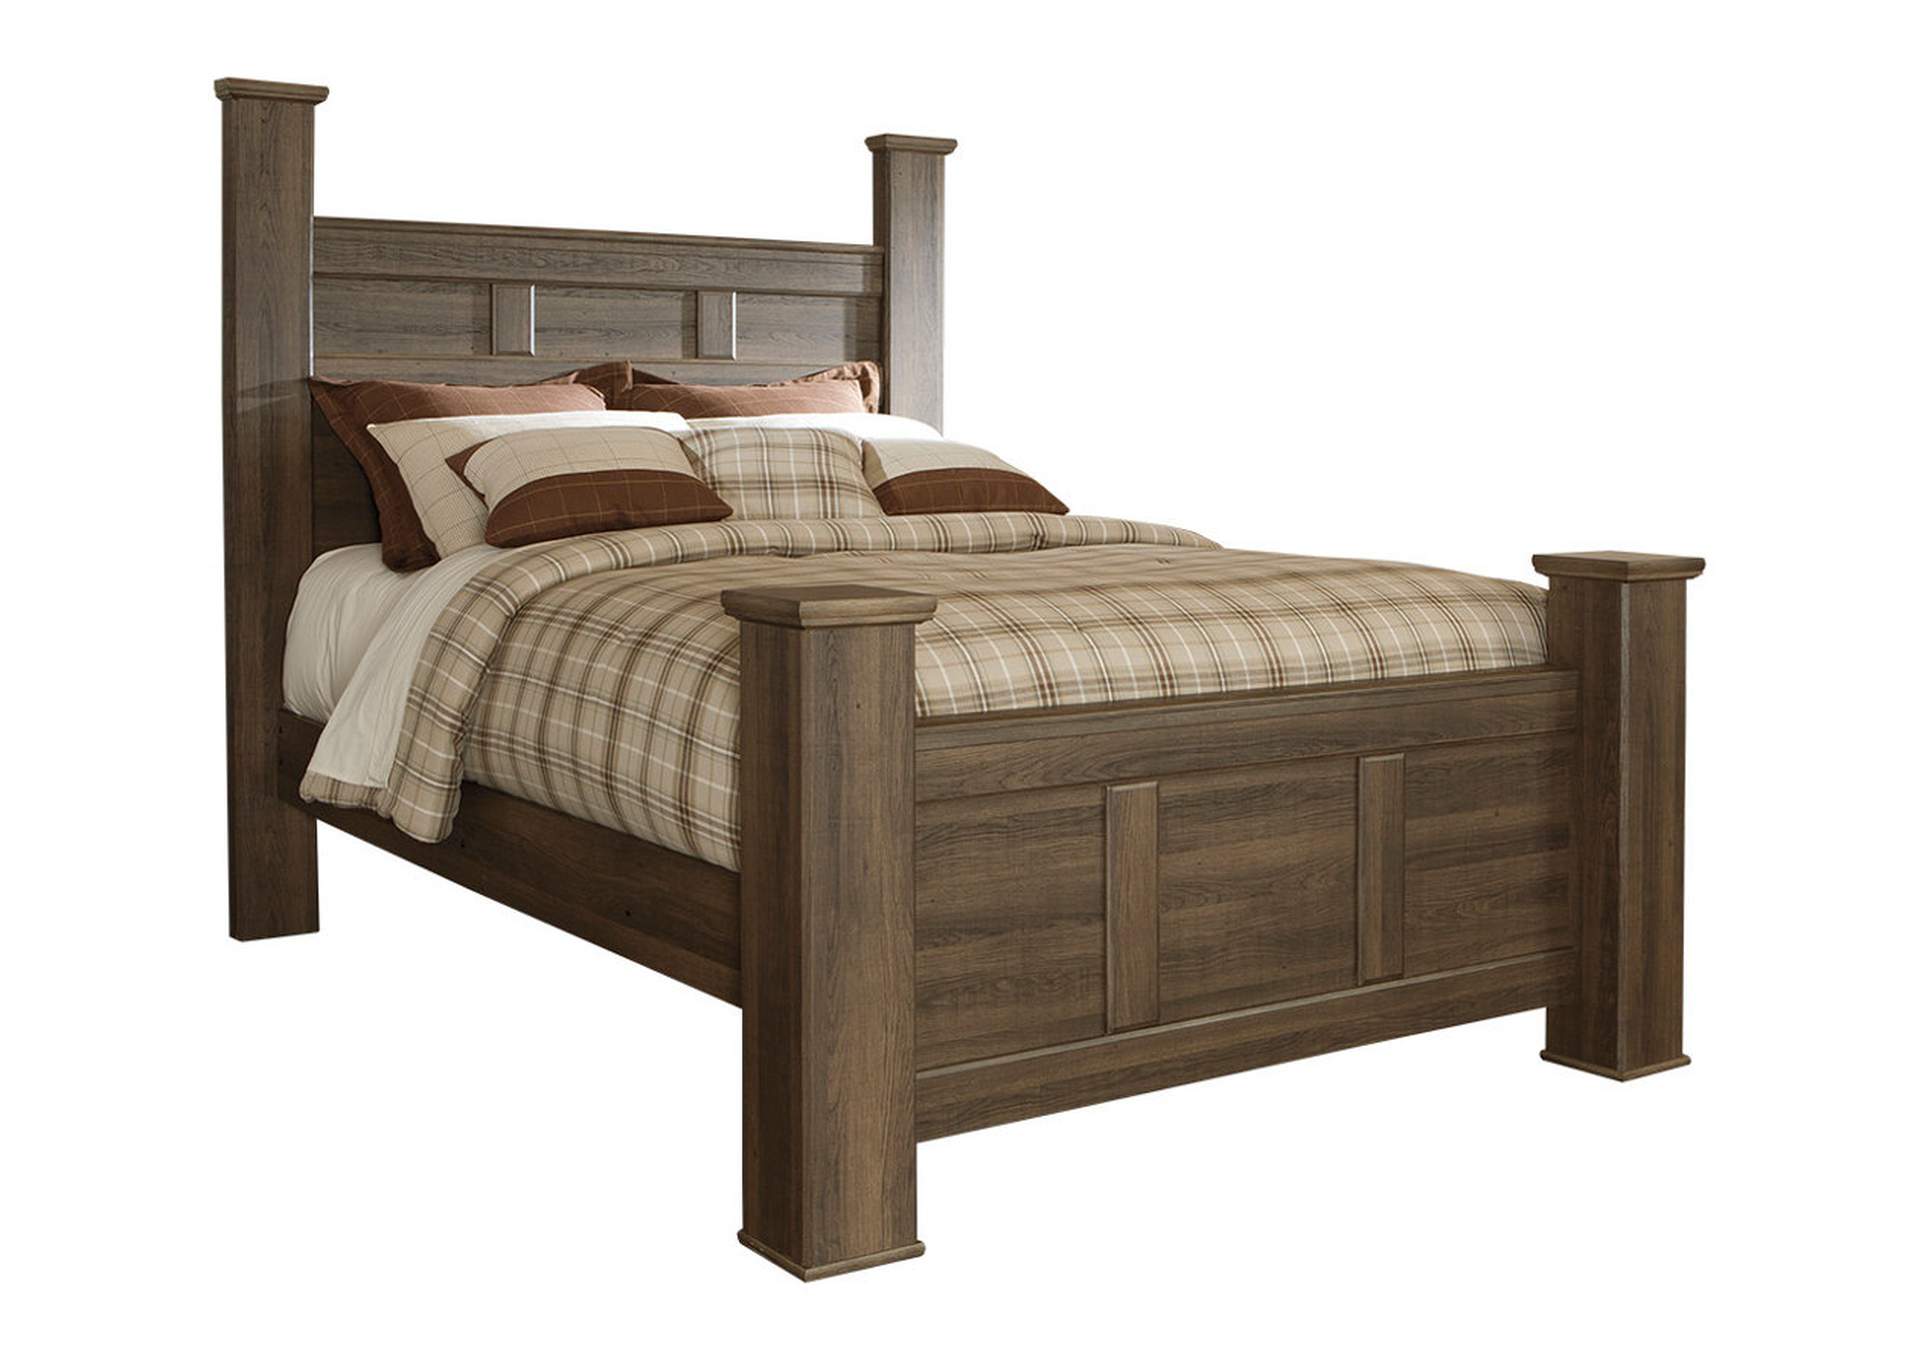 Juararo Queen Poster Bed with Mirrored Dresser, Chest and 2 Nightstands,Signature Design By Ashley